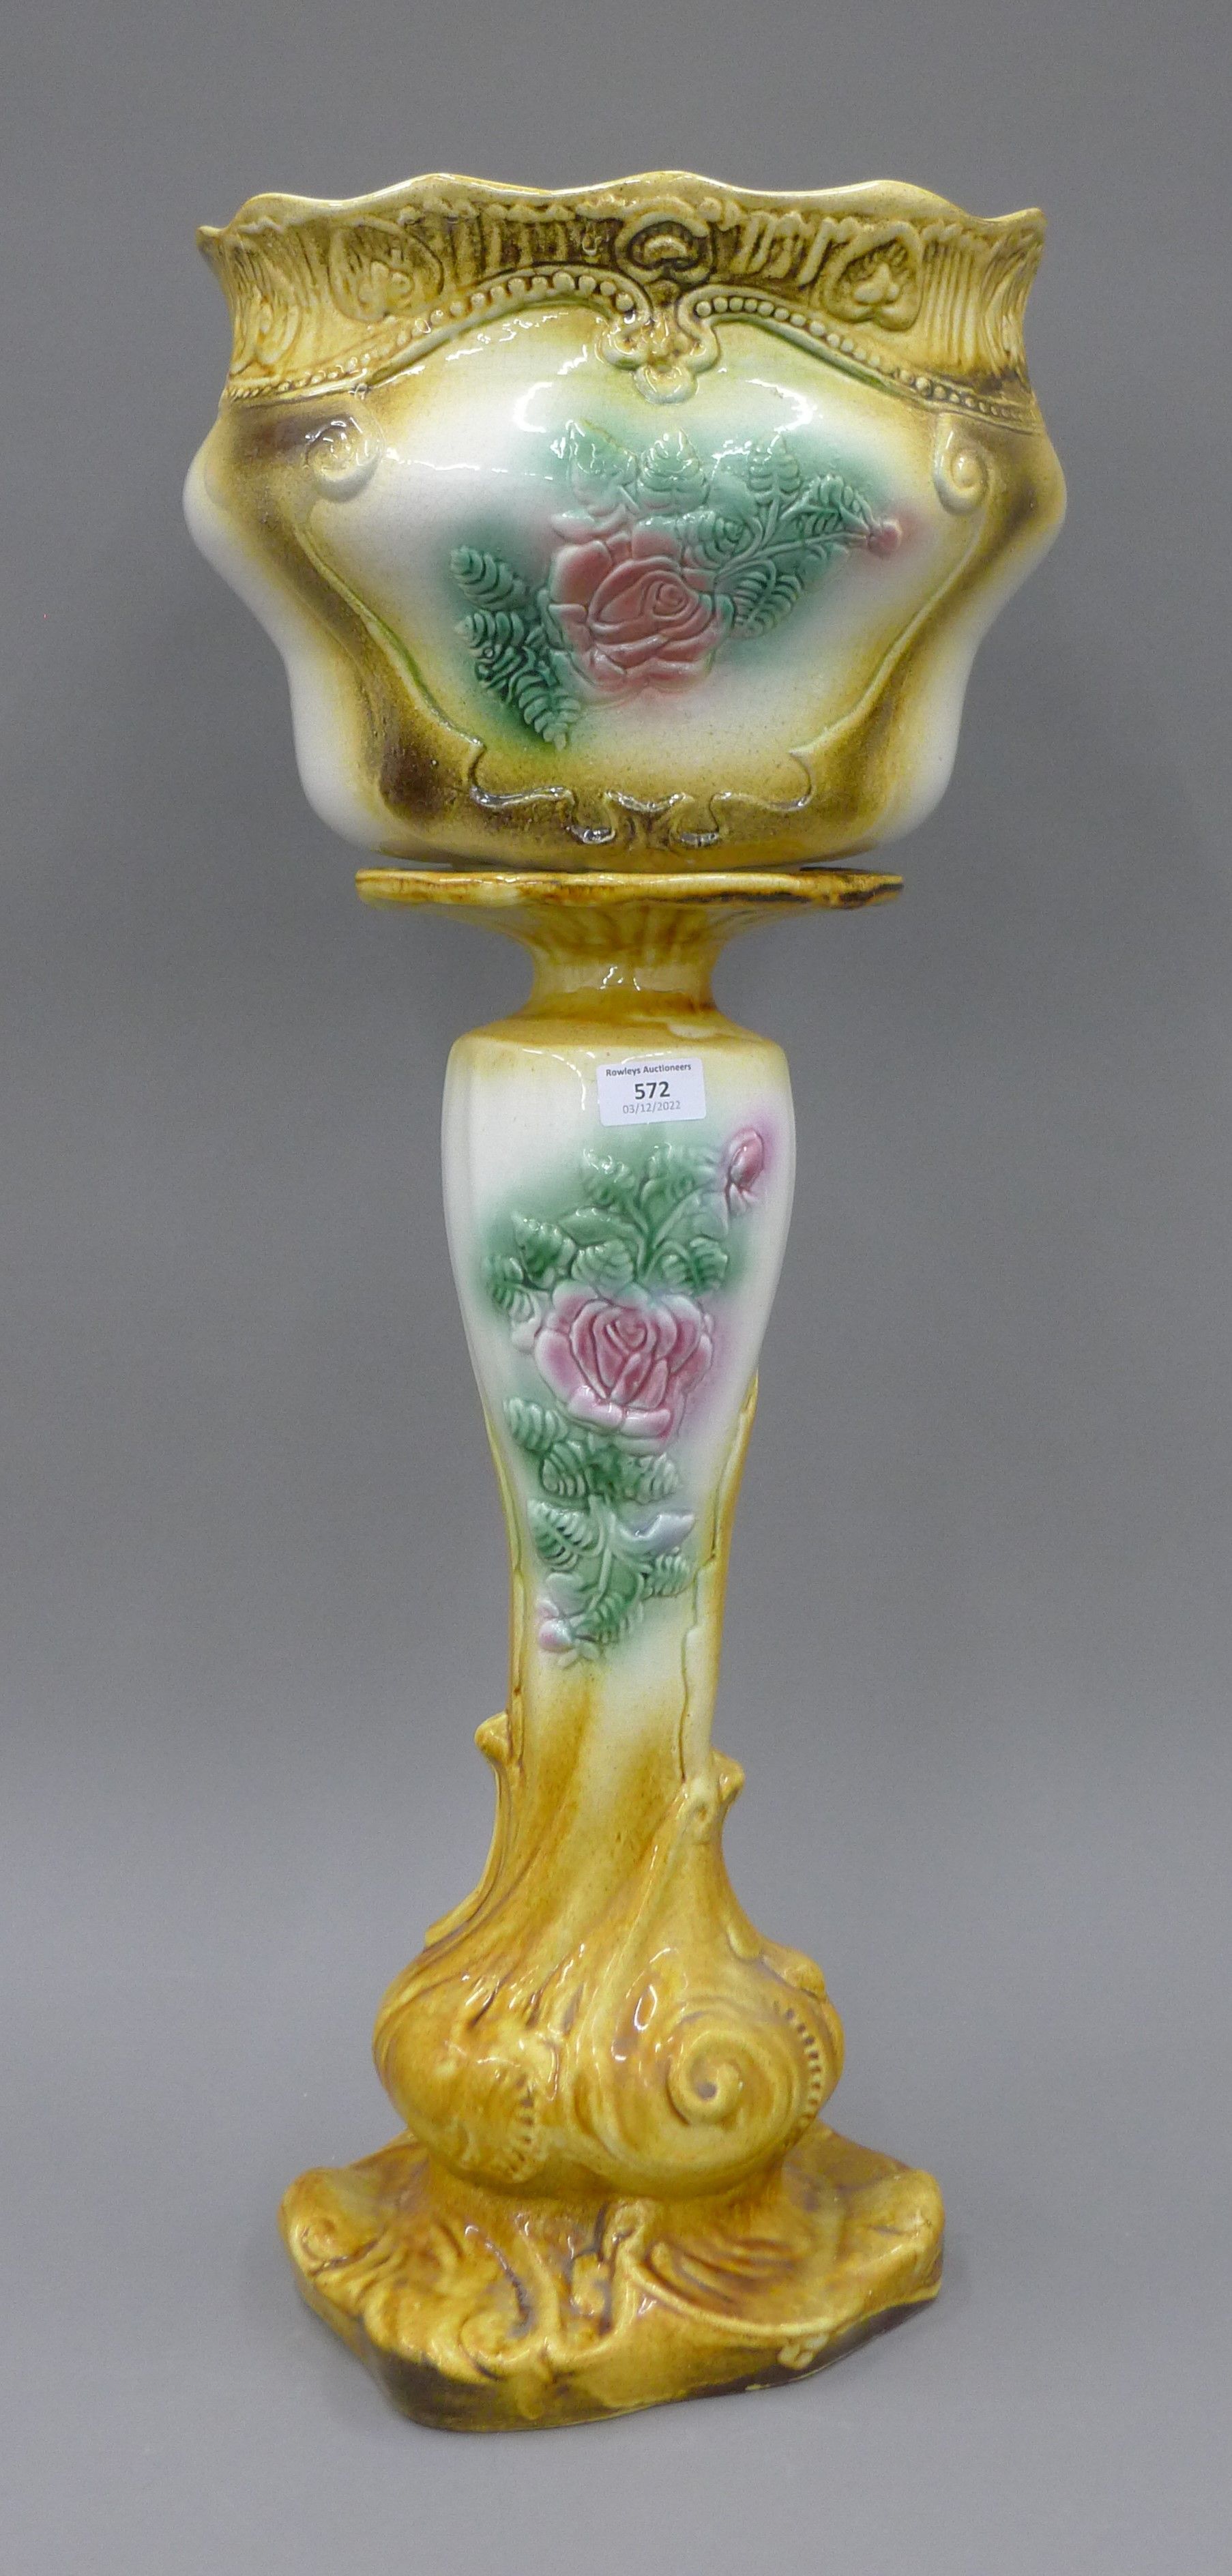 A Victorian jardiniere on stand. 77 cm high overall.